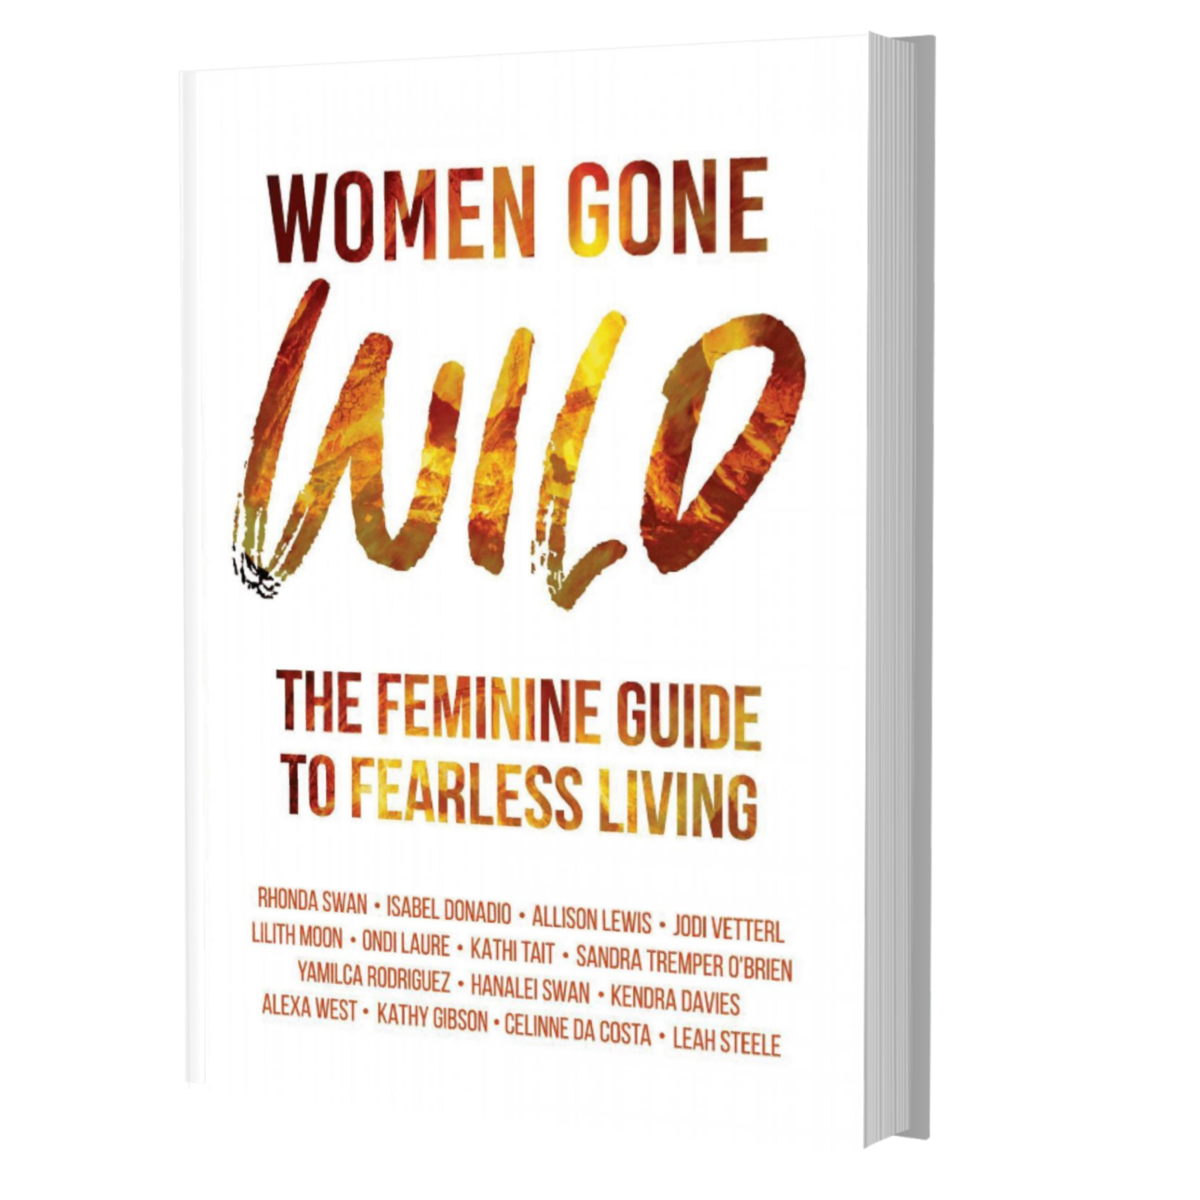 Women Gone Wild Hardcover Autographed By Kathi